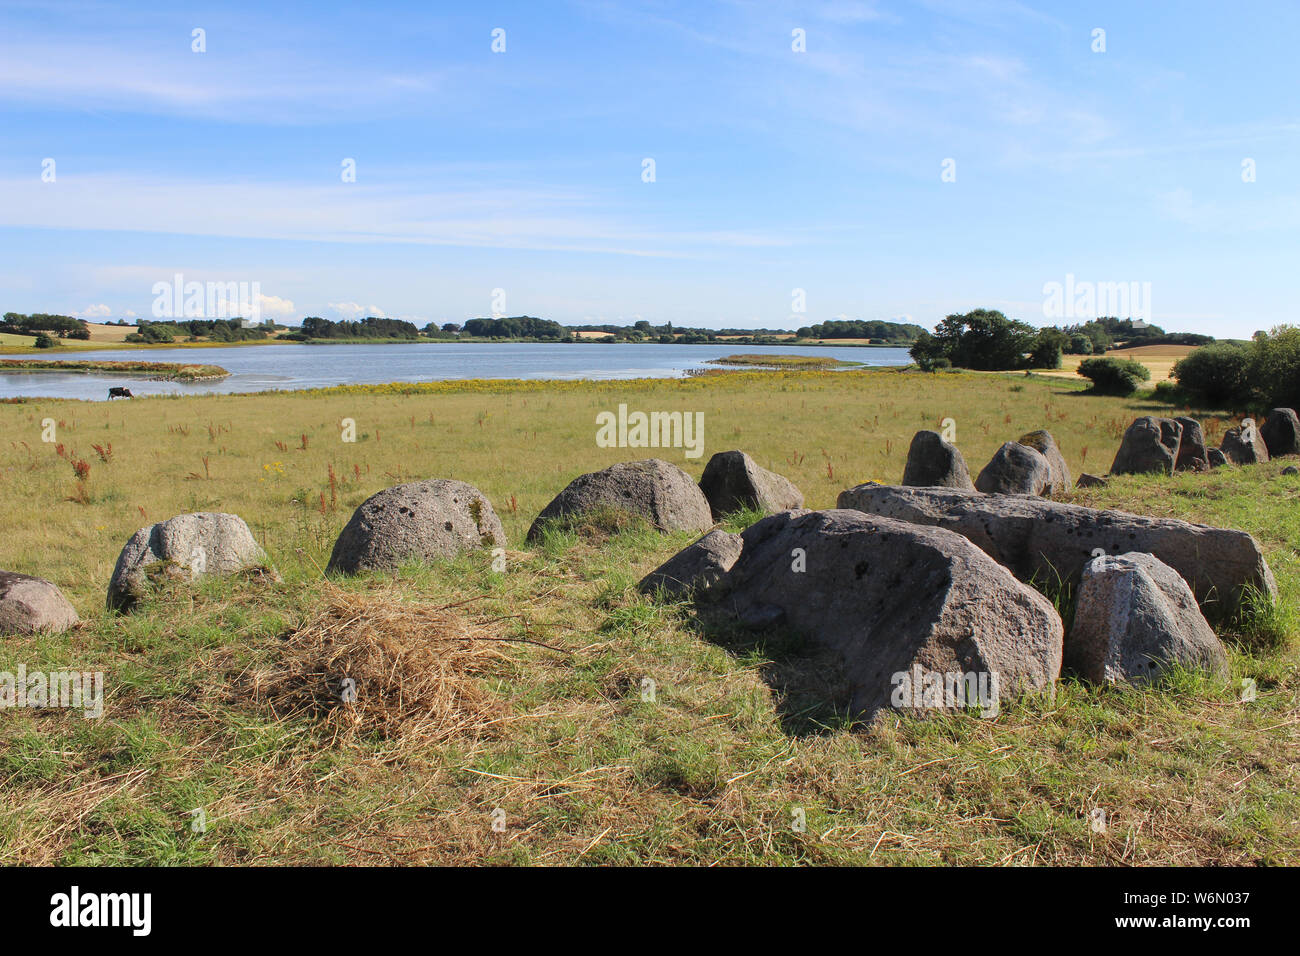 View of the Long barrow neolithic stones and the surrounding countryside at Norreballe Nor near Humble, Langeland, Denmark. Stock Photo